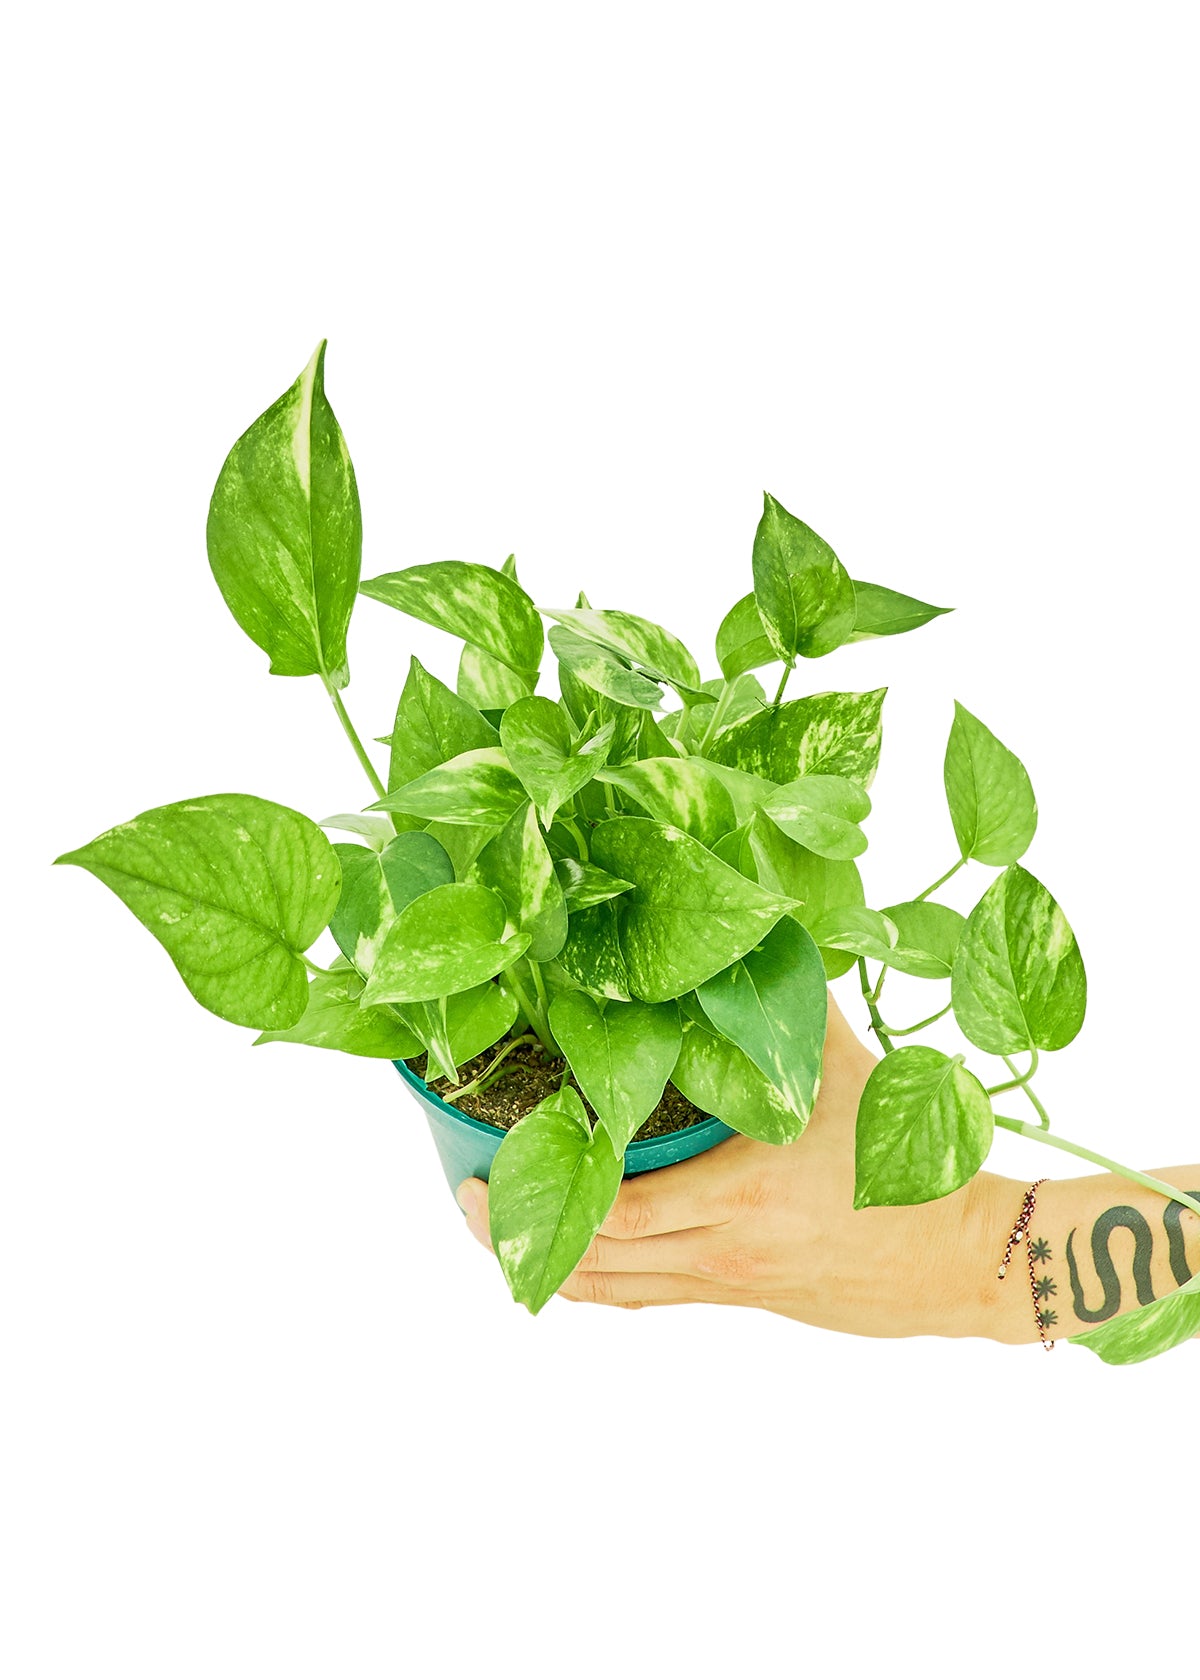 Medium size Golden Pothos in a growers pot with a white background and a hand holding the pot showing the top view